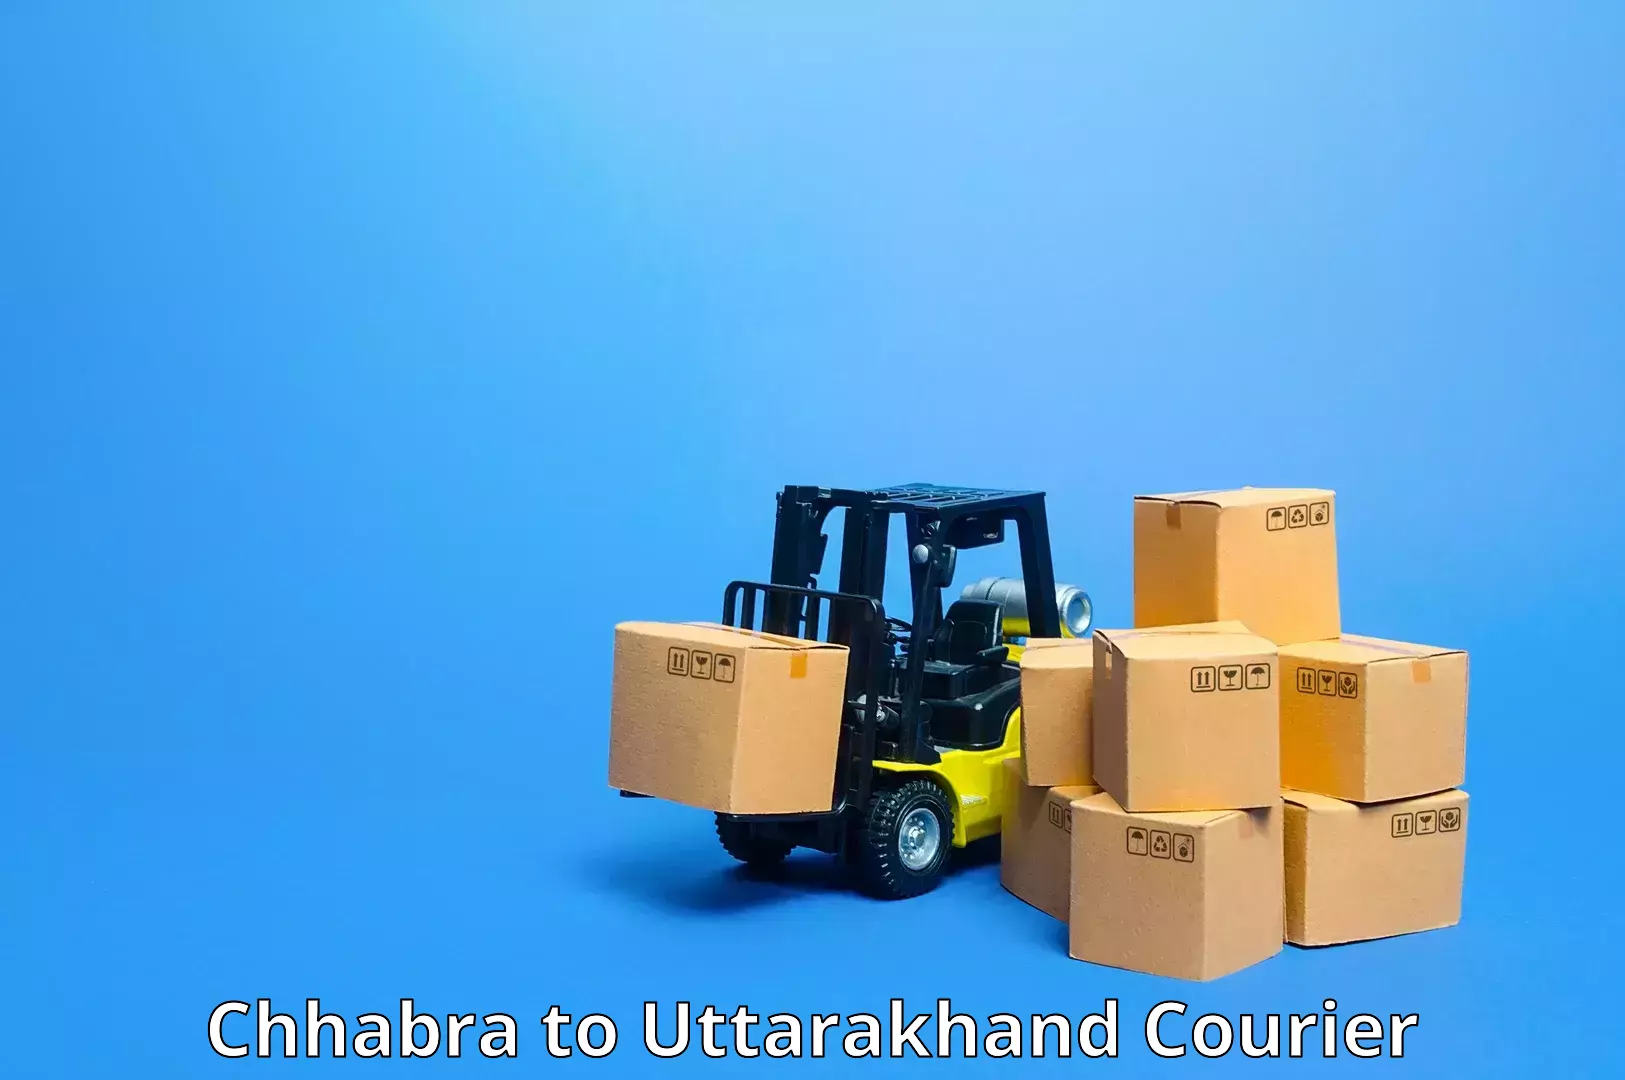 State-of-the-art courier technology Chhabra to Ranikhet